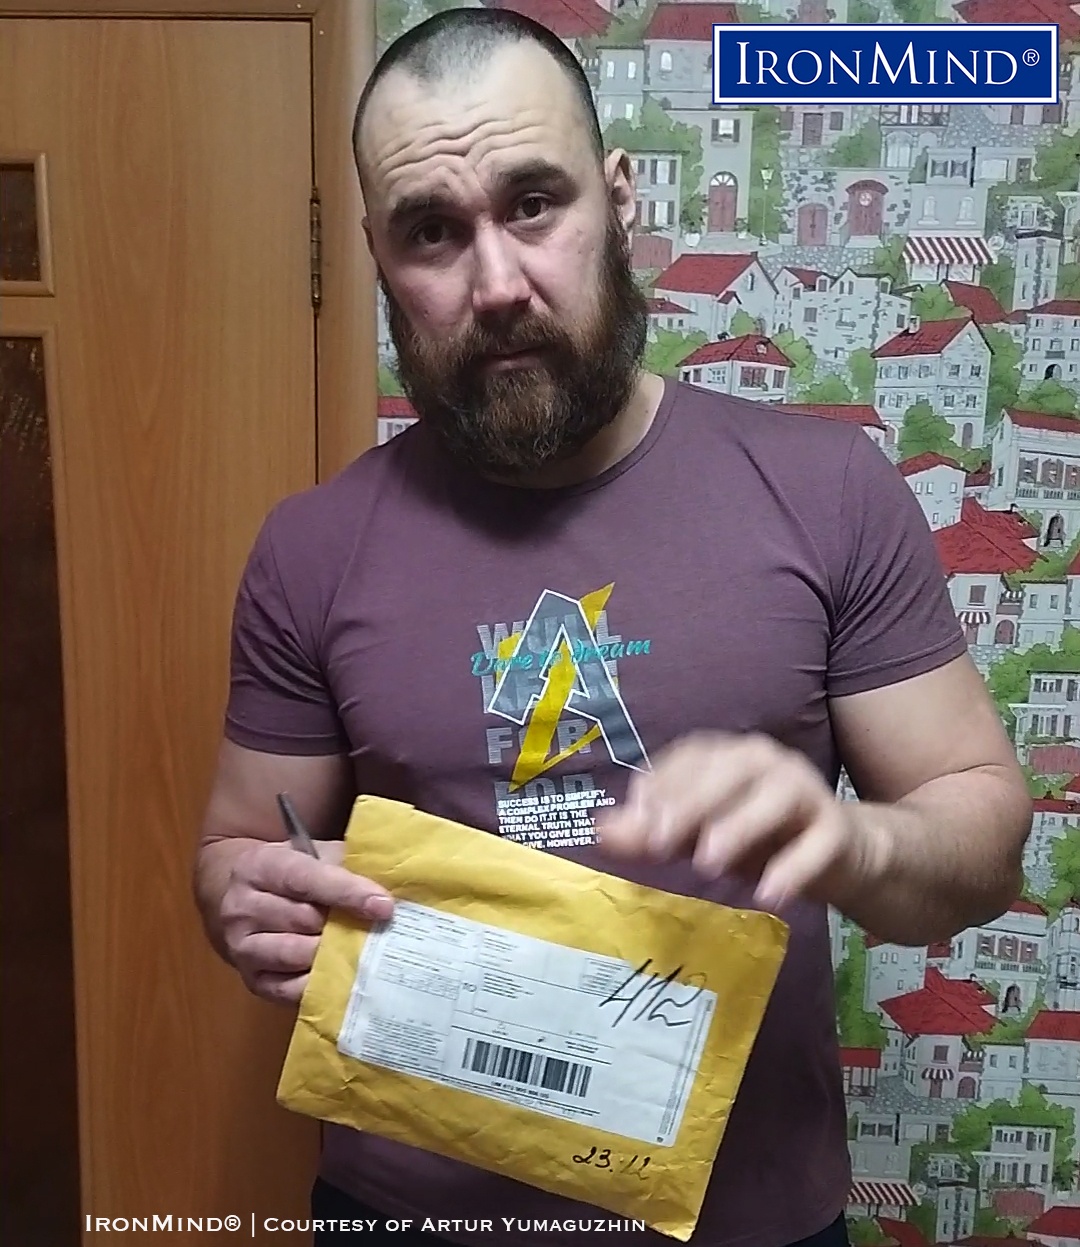 Ready to open the package from IronMind for his official attempt to close a Captains of Crush No. 3 gripper, 34-year old Artur Yumaguzhin (Russia) succeeded and has been certified on the legendary CoC No. 3 gripper. Yumaguzhin, who weighs 110 kg (about 243 lb.) and is 190 cm (about 6’ 3”) tall, works as a mining mechanic. IronMind® | Image courtesy of Artur Yumaguzhin